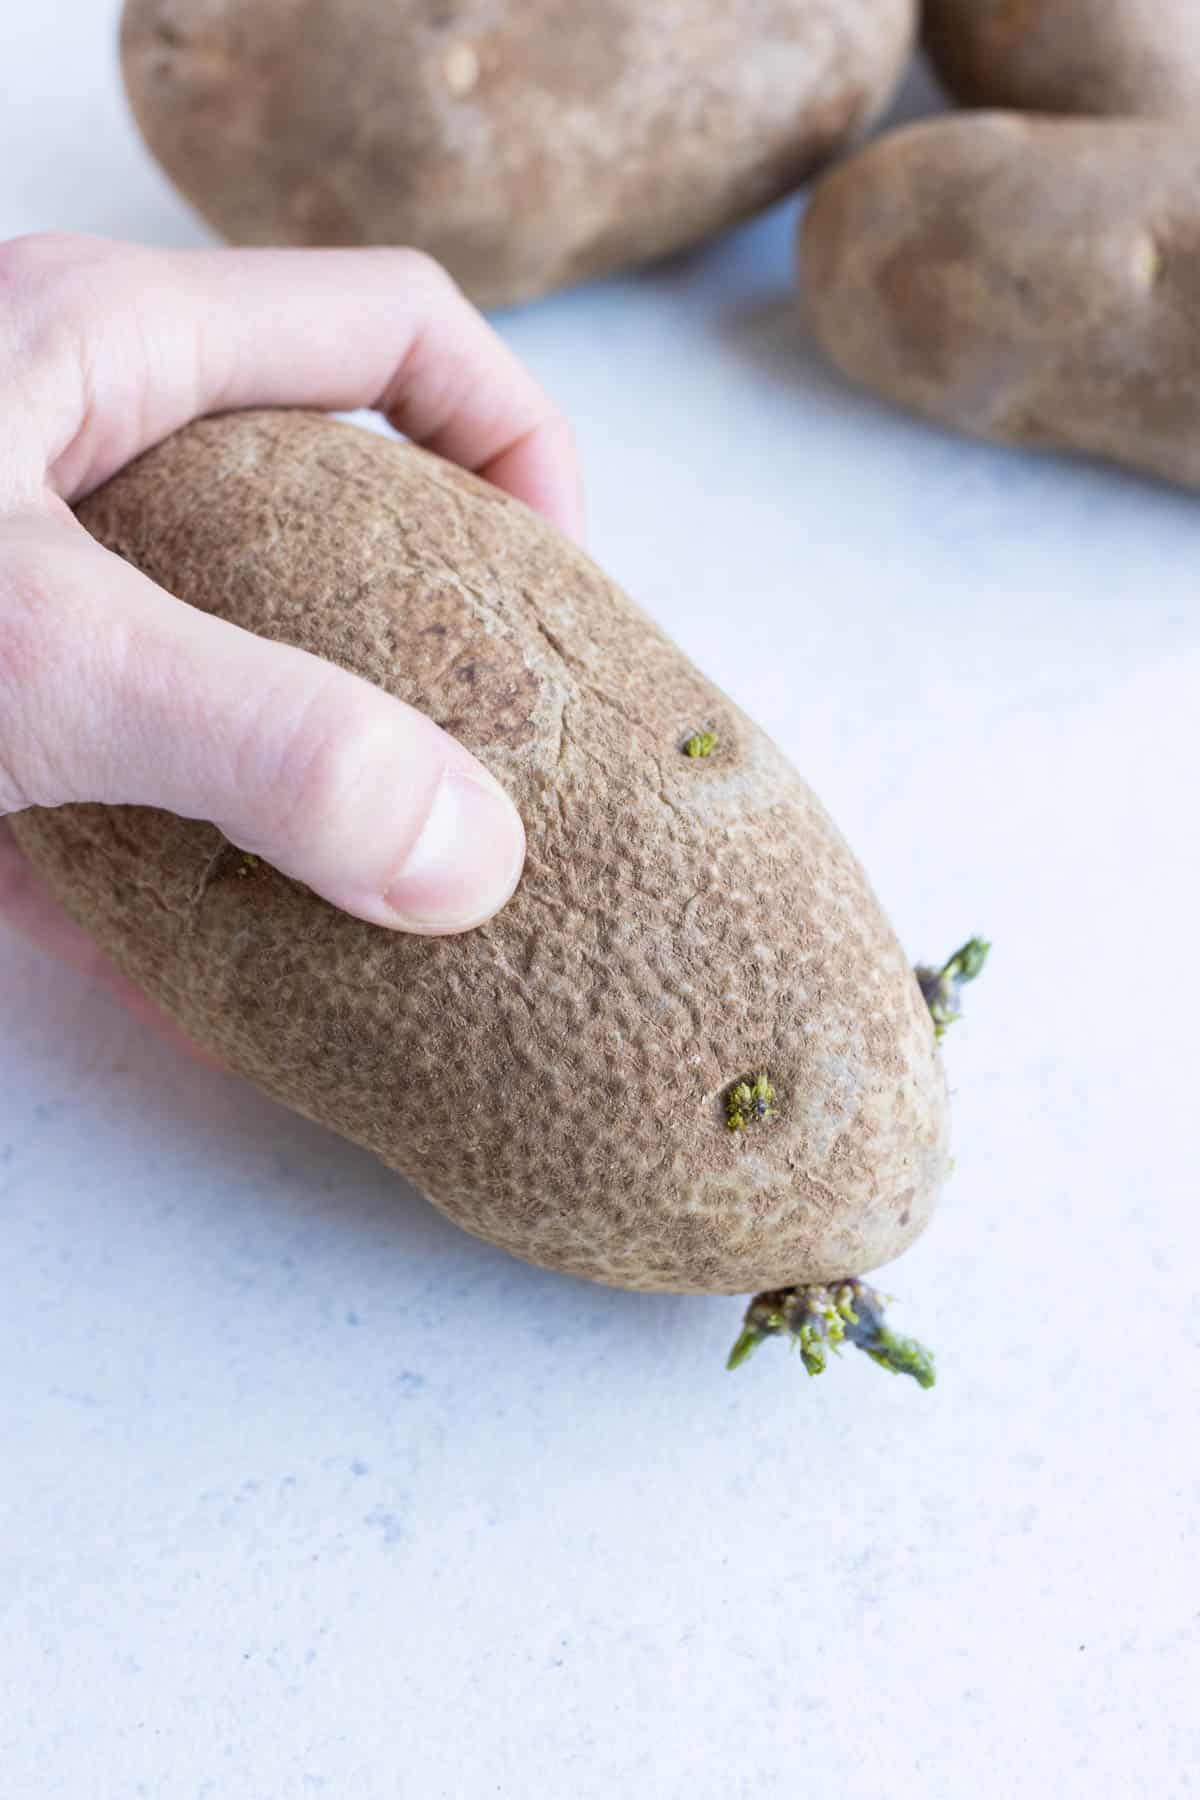 Someone holding a sprouted potato.